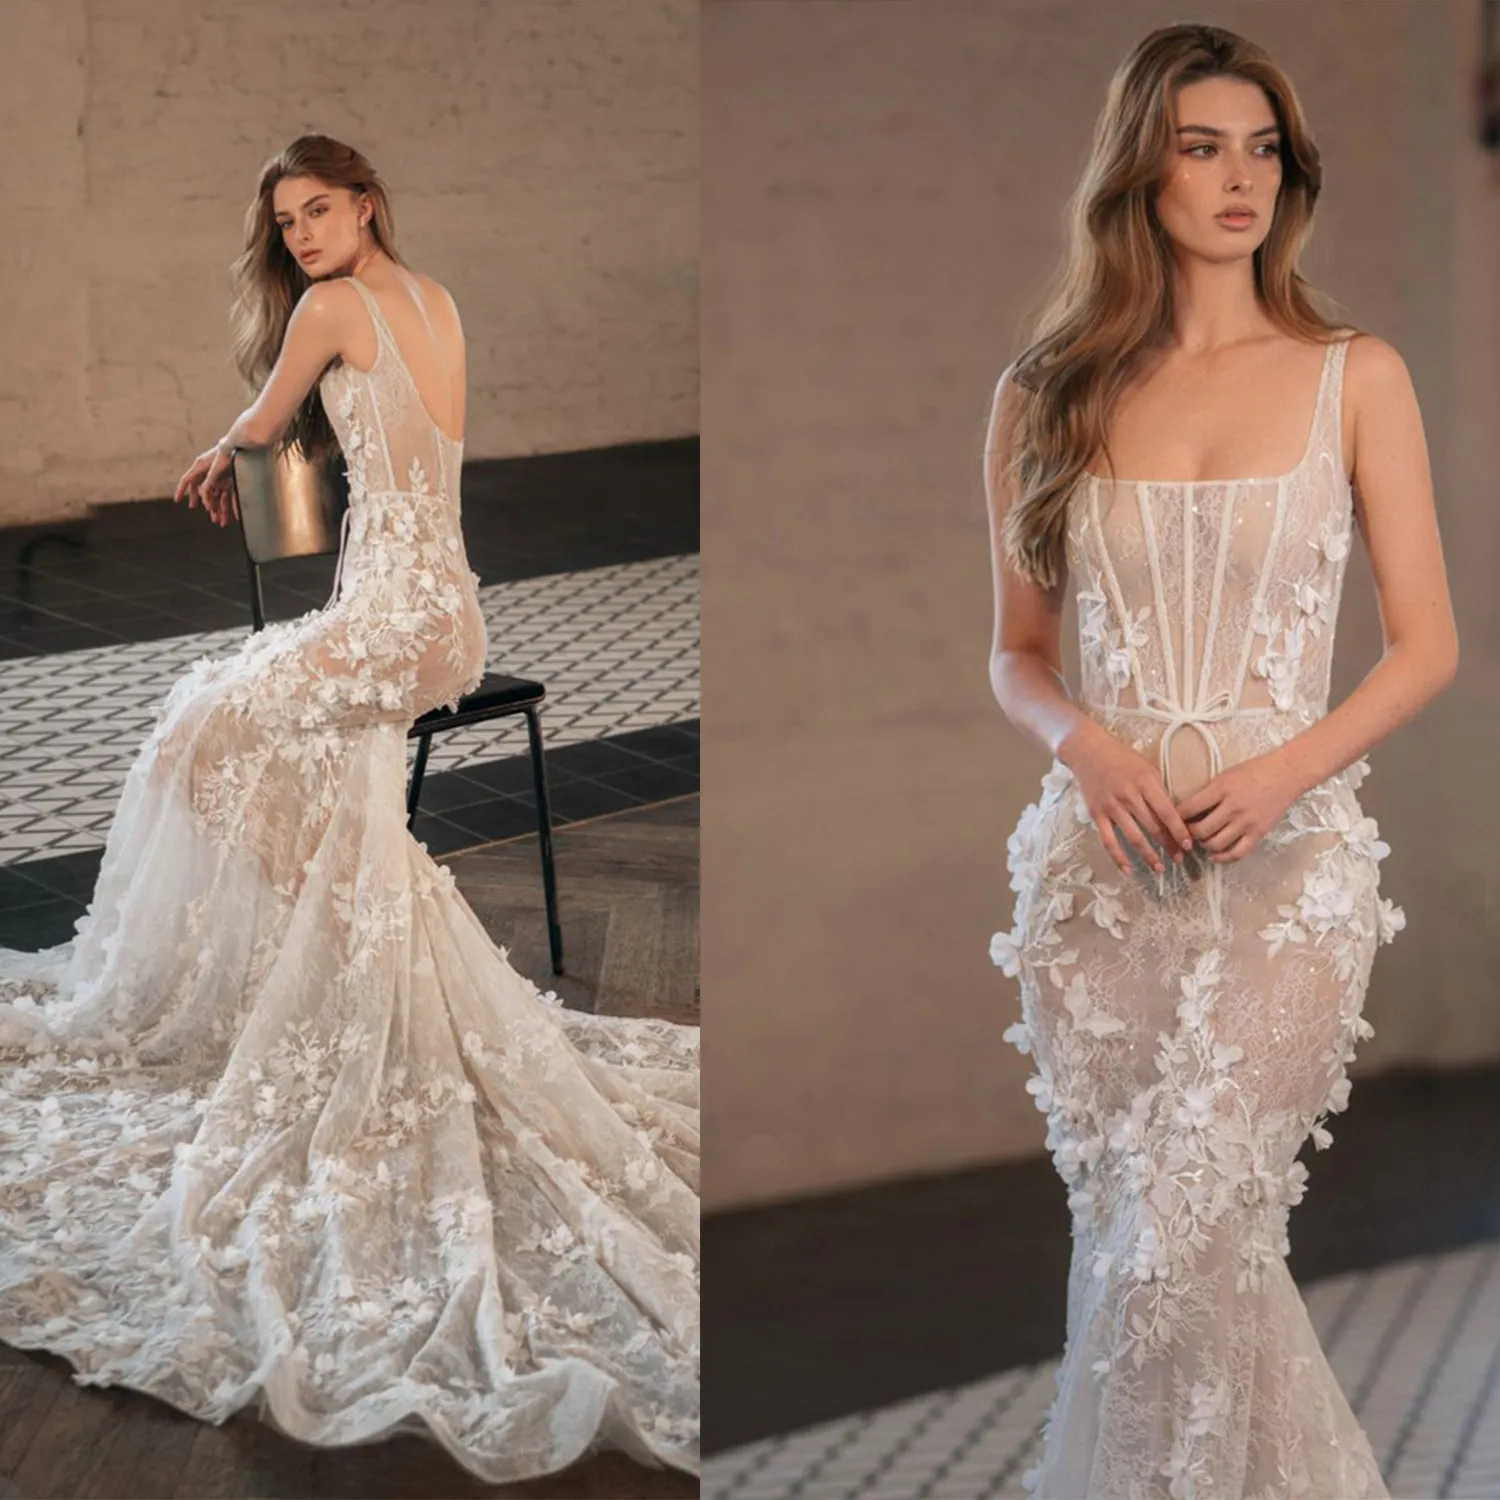 Fancy Spaghetti Stems Mermaid Wedding Dresses See Through Backless Bridal Gowns 3D-Floral Appliciques Illusion Sweep Train Robe Brud Dress